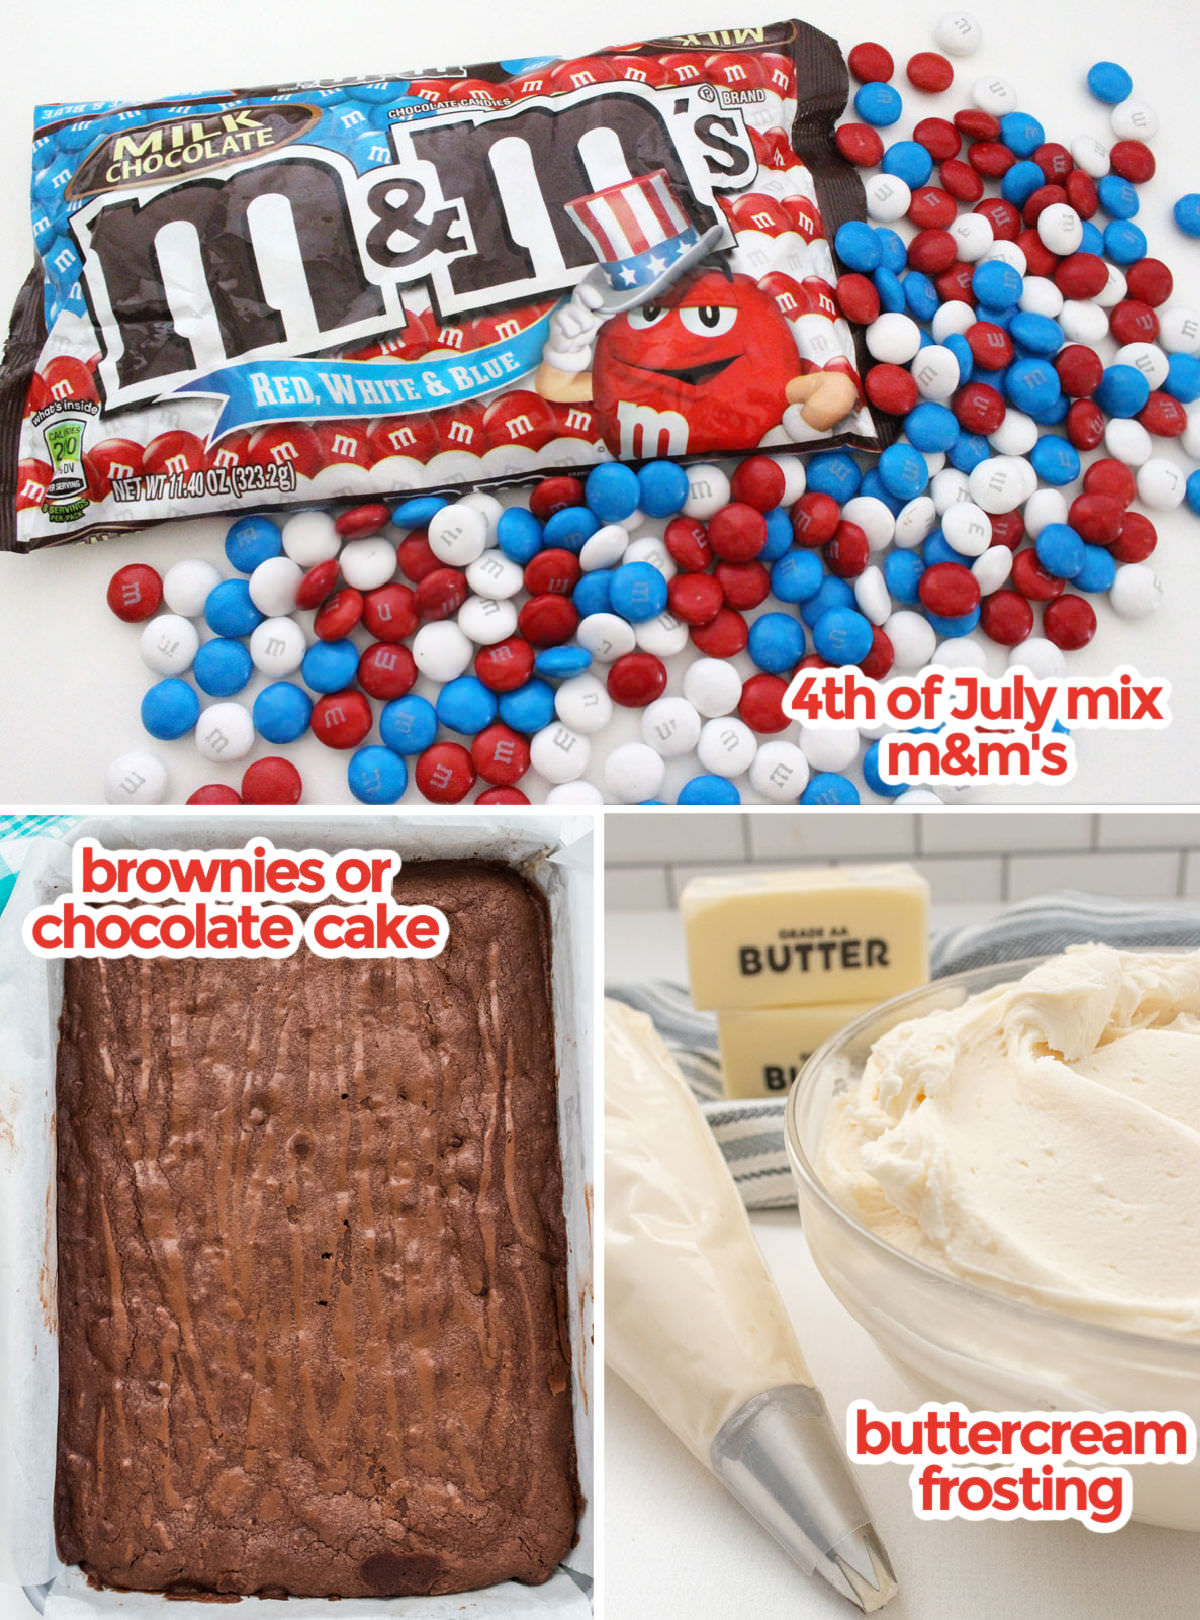 All the ingredients you will need to make an American Flag cake including Red White and Blue M&M's, Buttercream Frosting and a 9x13" cake.